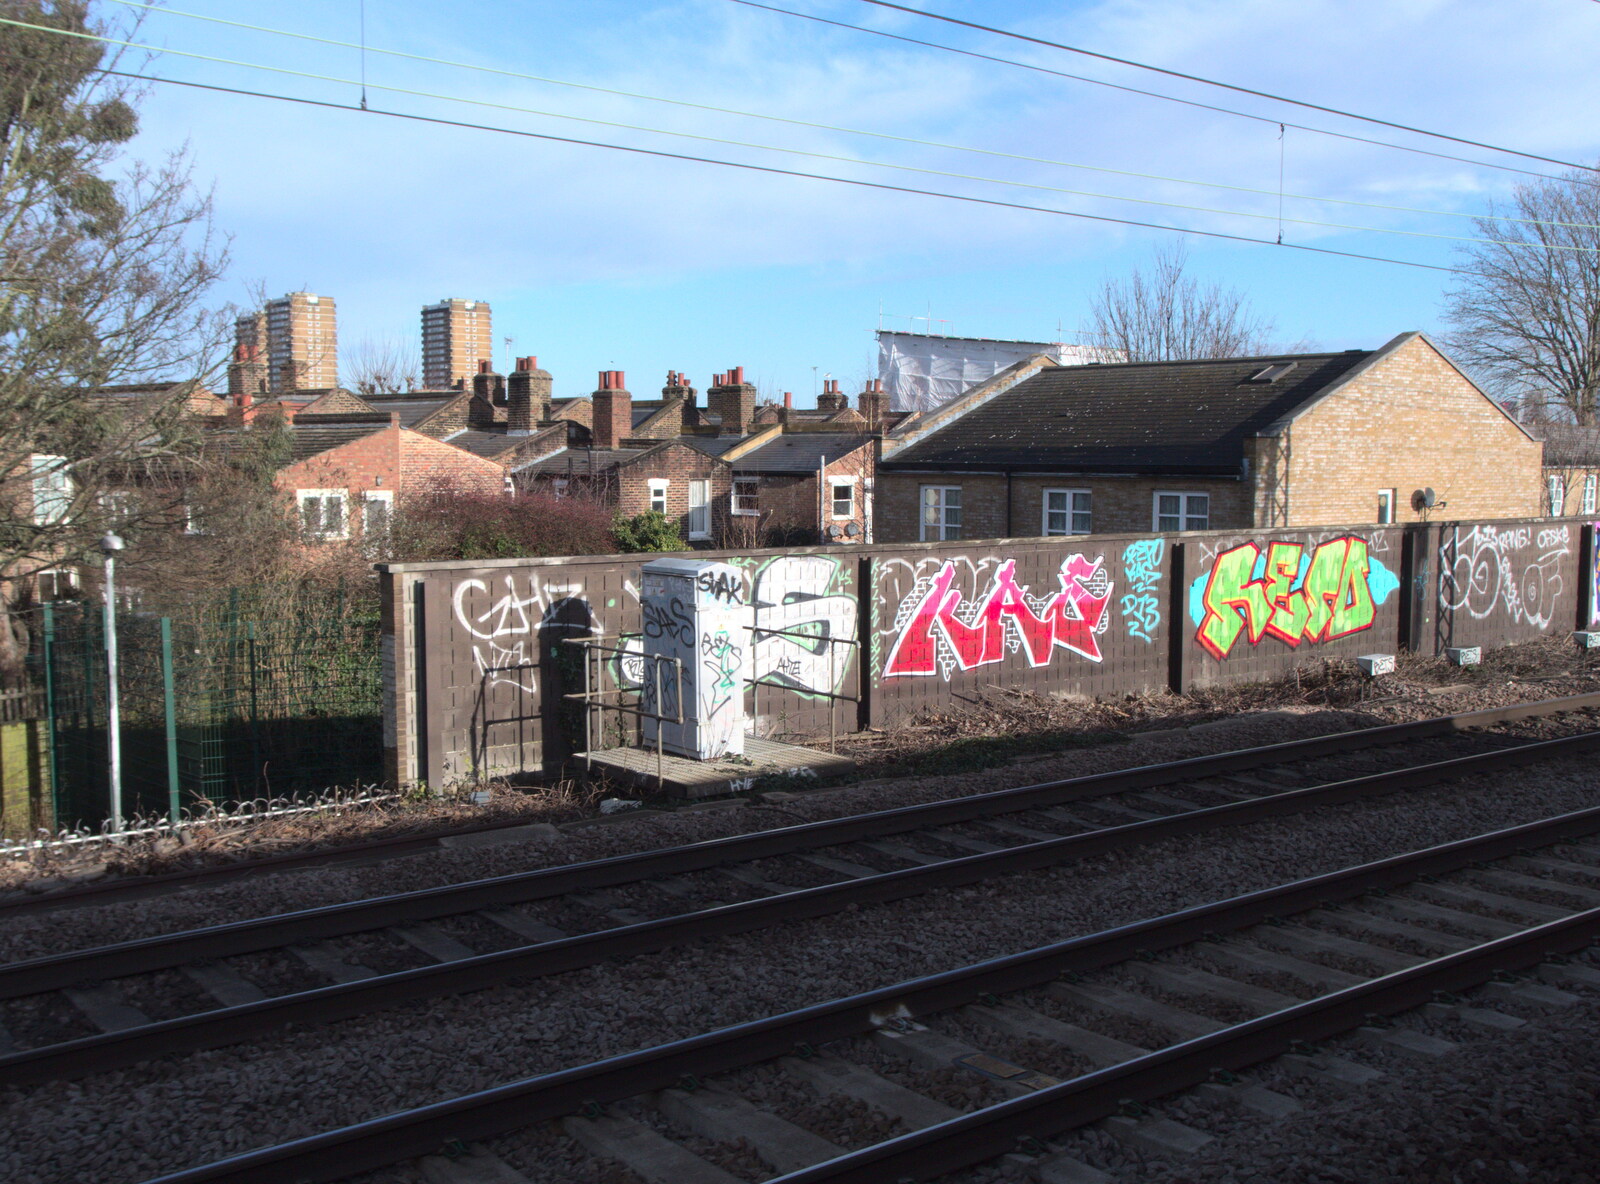 Broken-down Freight Trains, Manor Park, London - 28th January 2020: A pair of bright tags stand out in a sea of brown